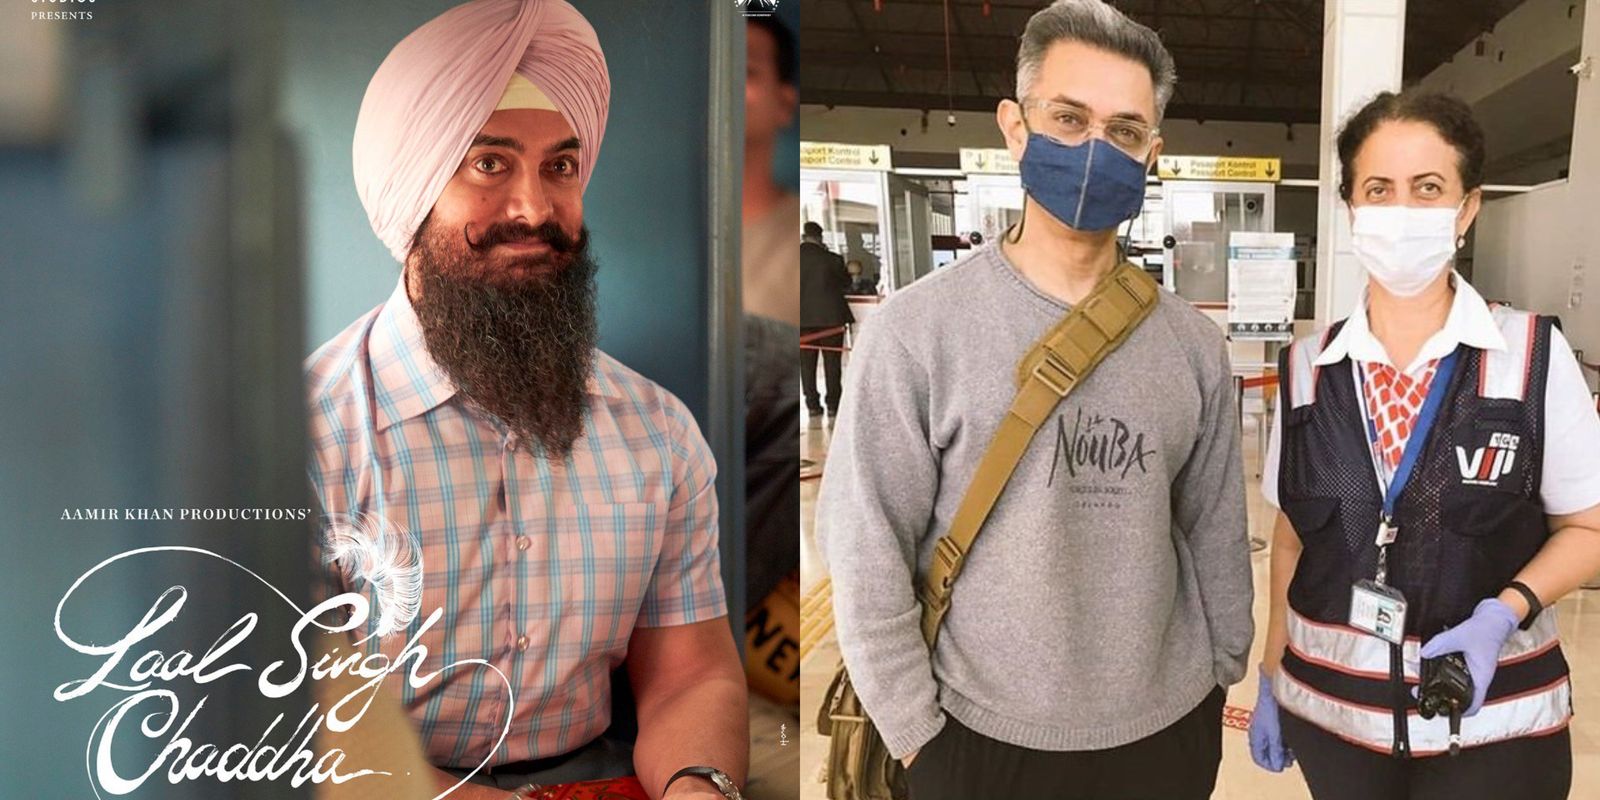 Aamir Khan’s Laal Singh Chaddha To Release On Christmas 2021; Actor Jets Off To Turkey To Finish Shoot